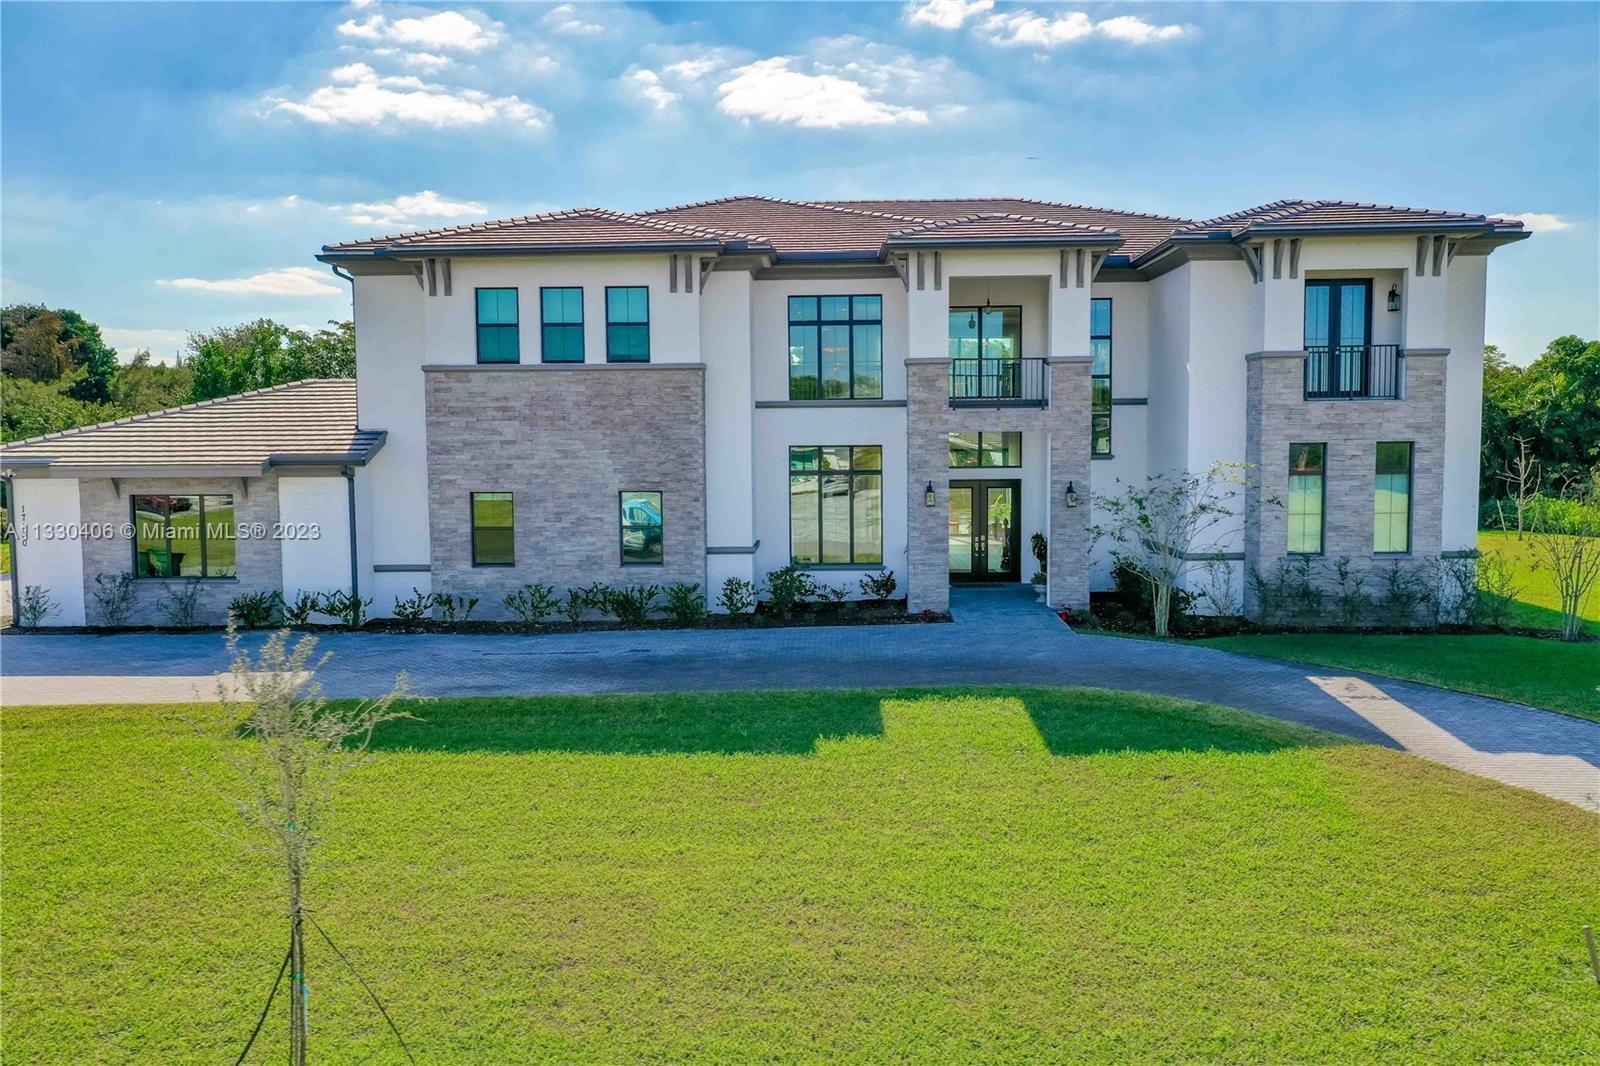 7,906 SQFT LIVING UNDER AC AND 8,509 SQFT LIVING AND GARAGE! 9,876SQFT LIVING/GARAGE/BALCONIES AND COVERED LENAI. OVER AN ACRE, RECENTLY BUILT IN 2021 2-story home in exclusive 10 home community, Terra Ranches in Southwest Ranches! Features a foyer that leads to a formal living area with large impact windows which open up completely and tuck away inside the walls leading to pool area. Large kitchen with high-end JennAir appliances. Full bar. Master bedroom on the first floor with a sitting area. Custom walk-in closet shelving. Elevator. Theater room with complete set up currently used as an office. Exterior back features expansive Lenai with retractable shutters, summer gas kitchen, and Californo pizza oven. Walk-in pool with hot-tub.